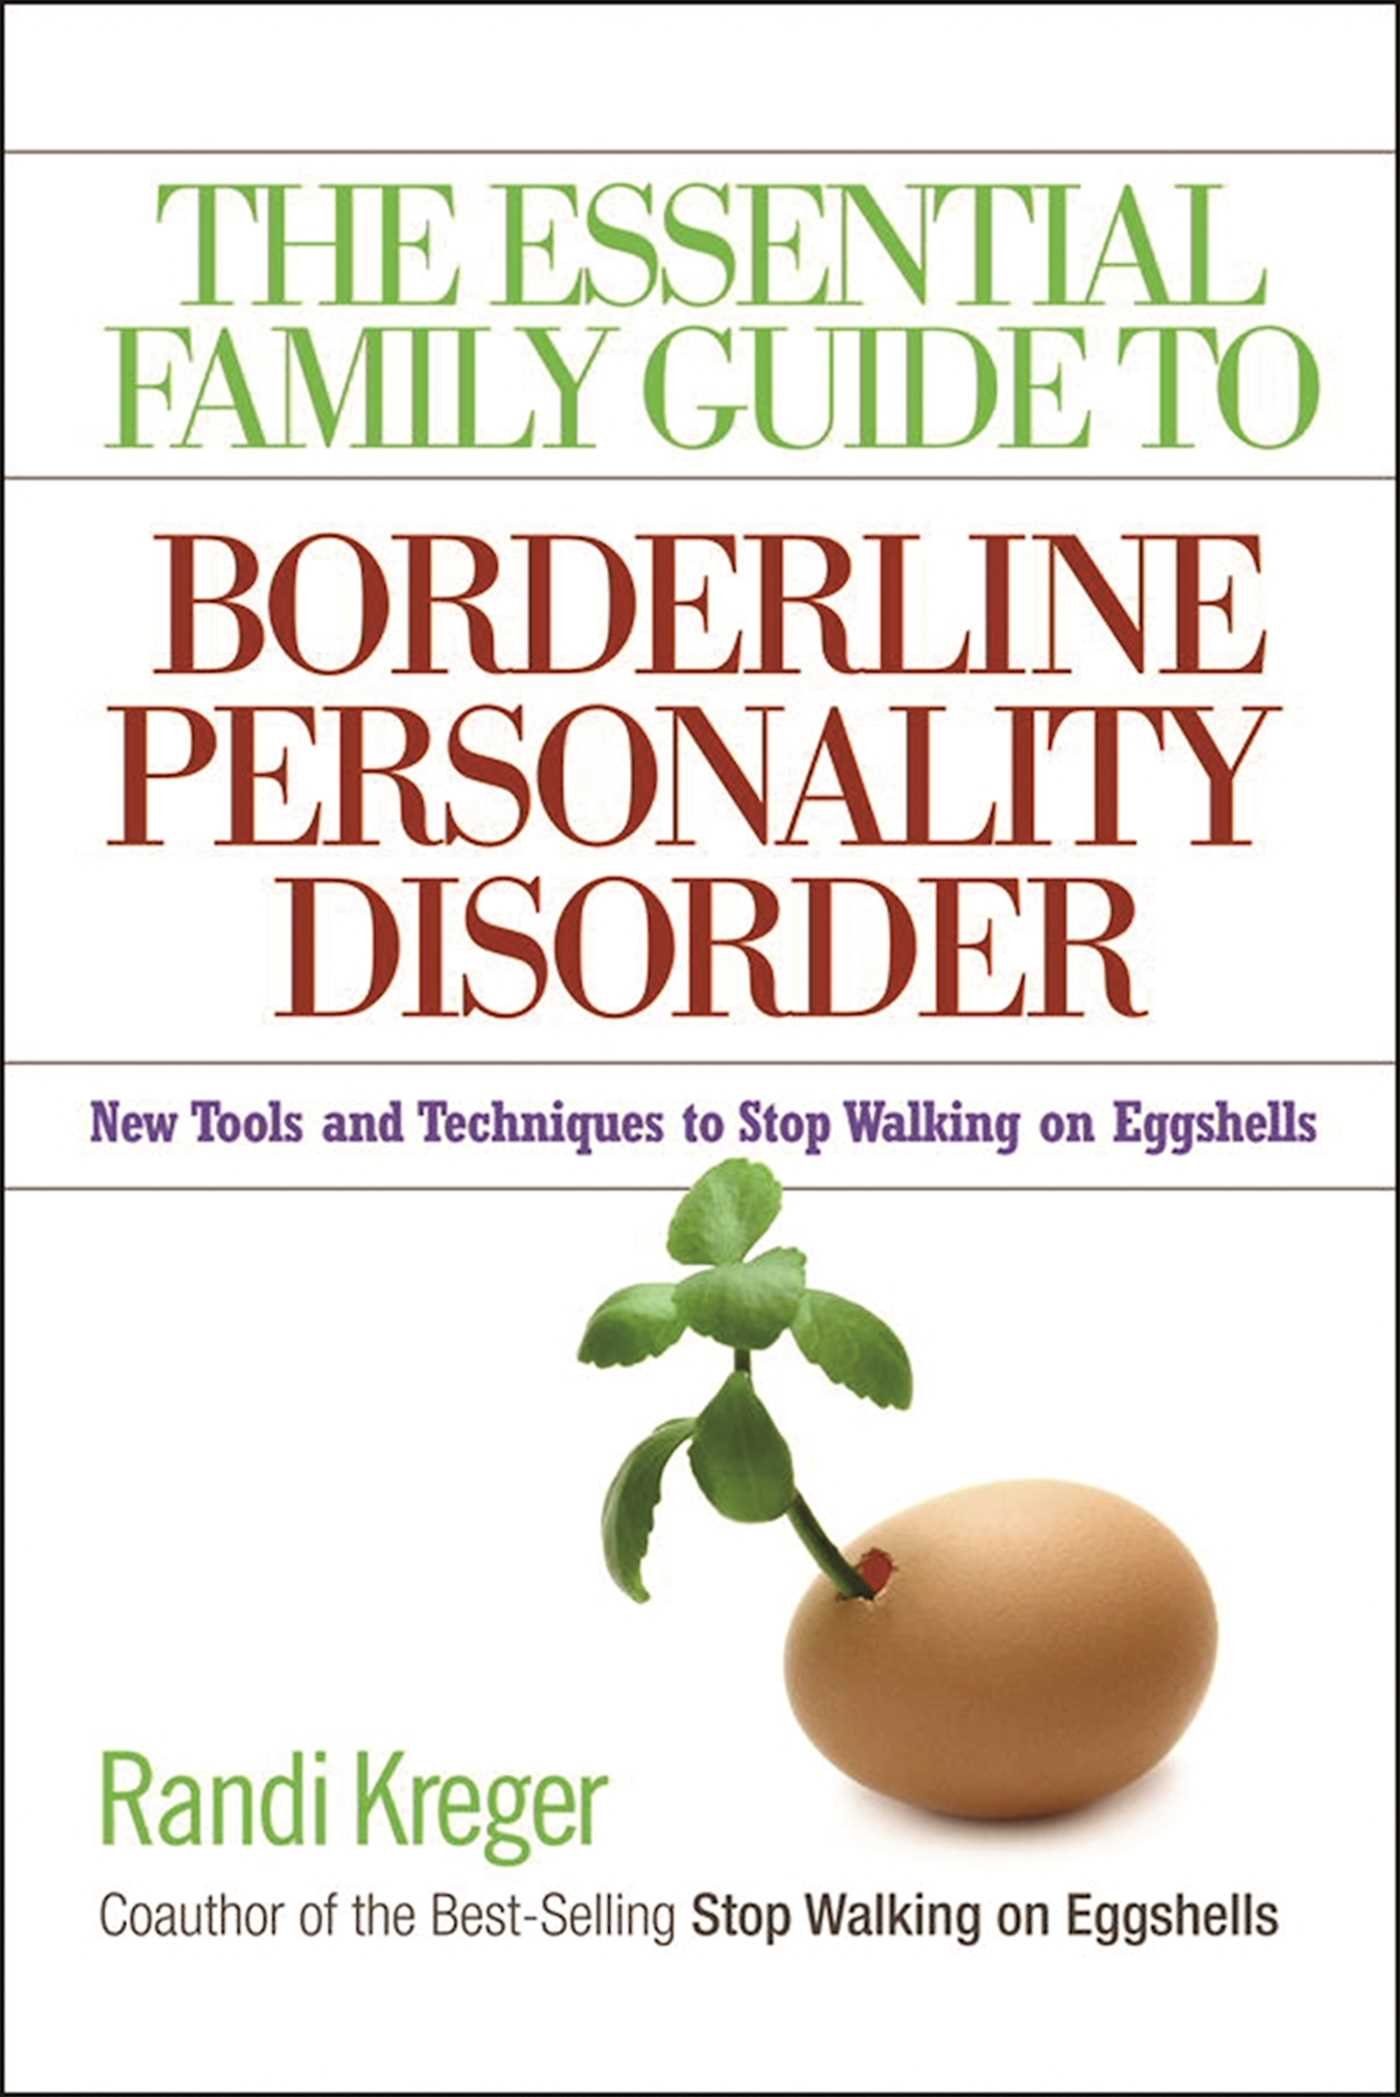 The Essential Family Guide to Borderline Personality Disorder